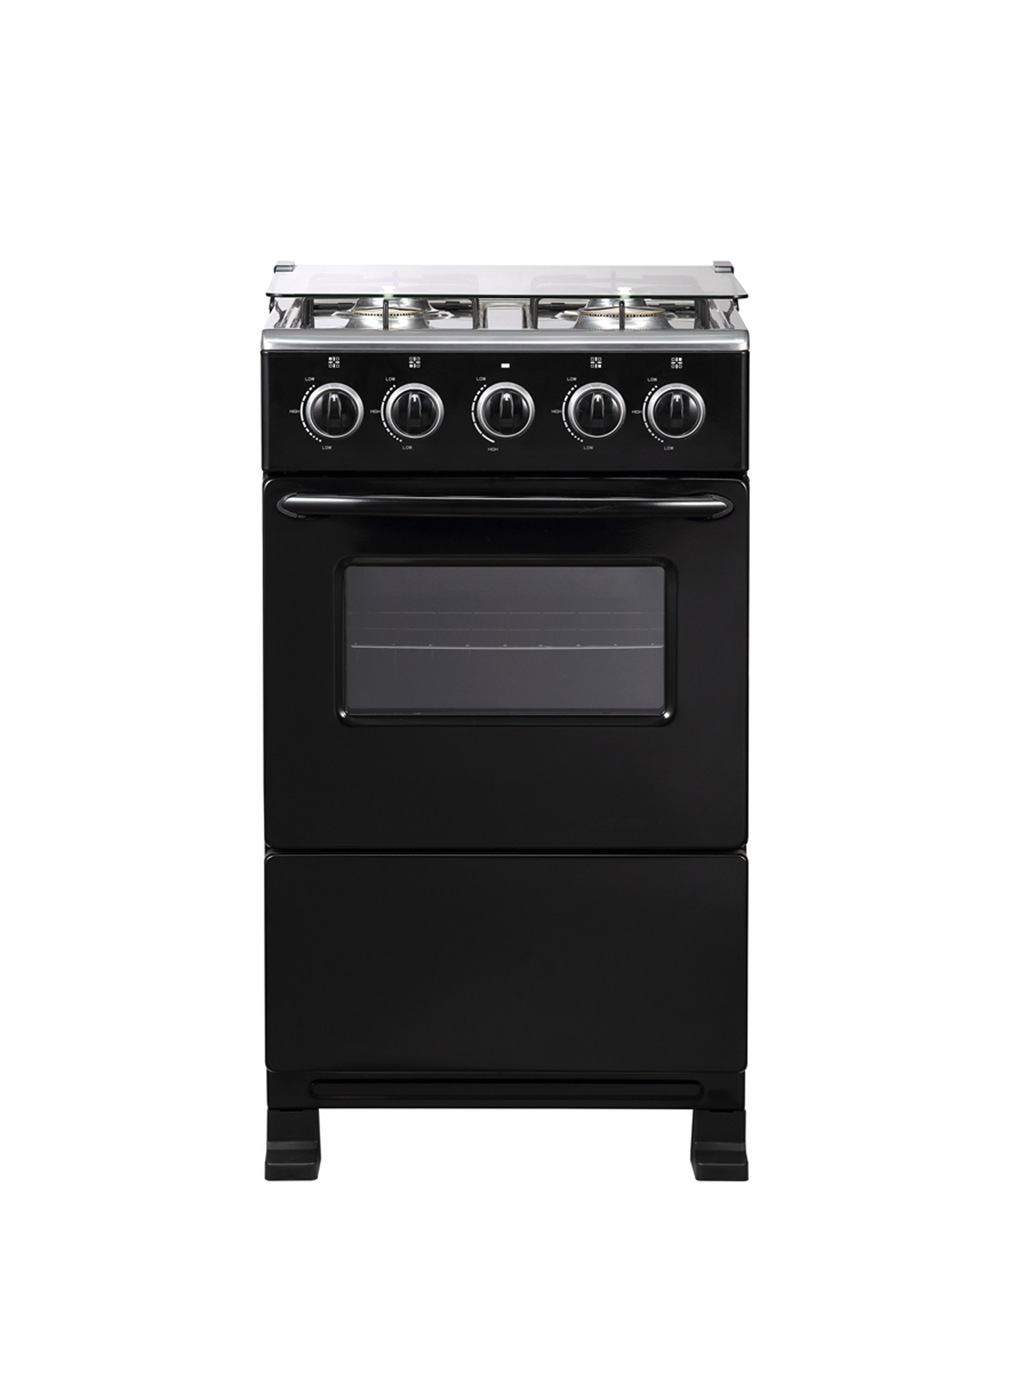 20 Inch Freestanding Gas Oven